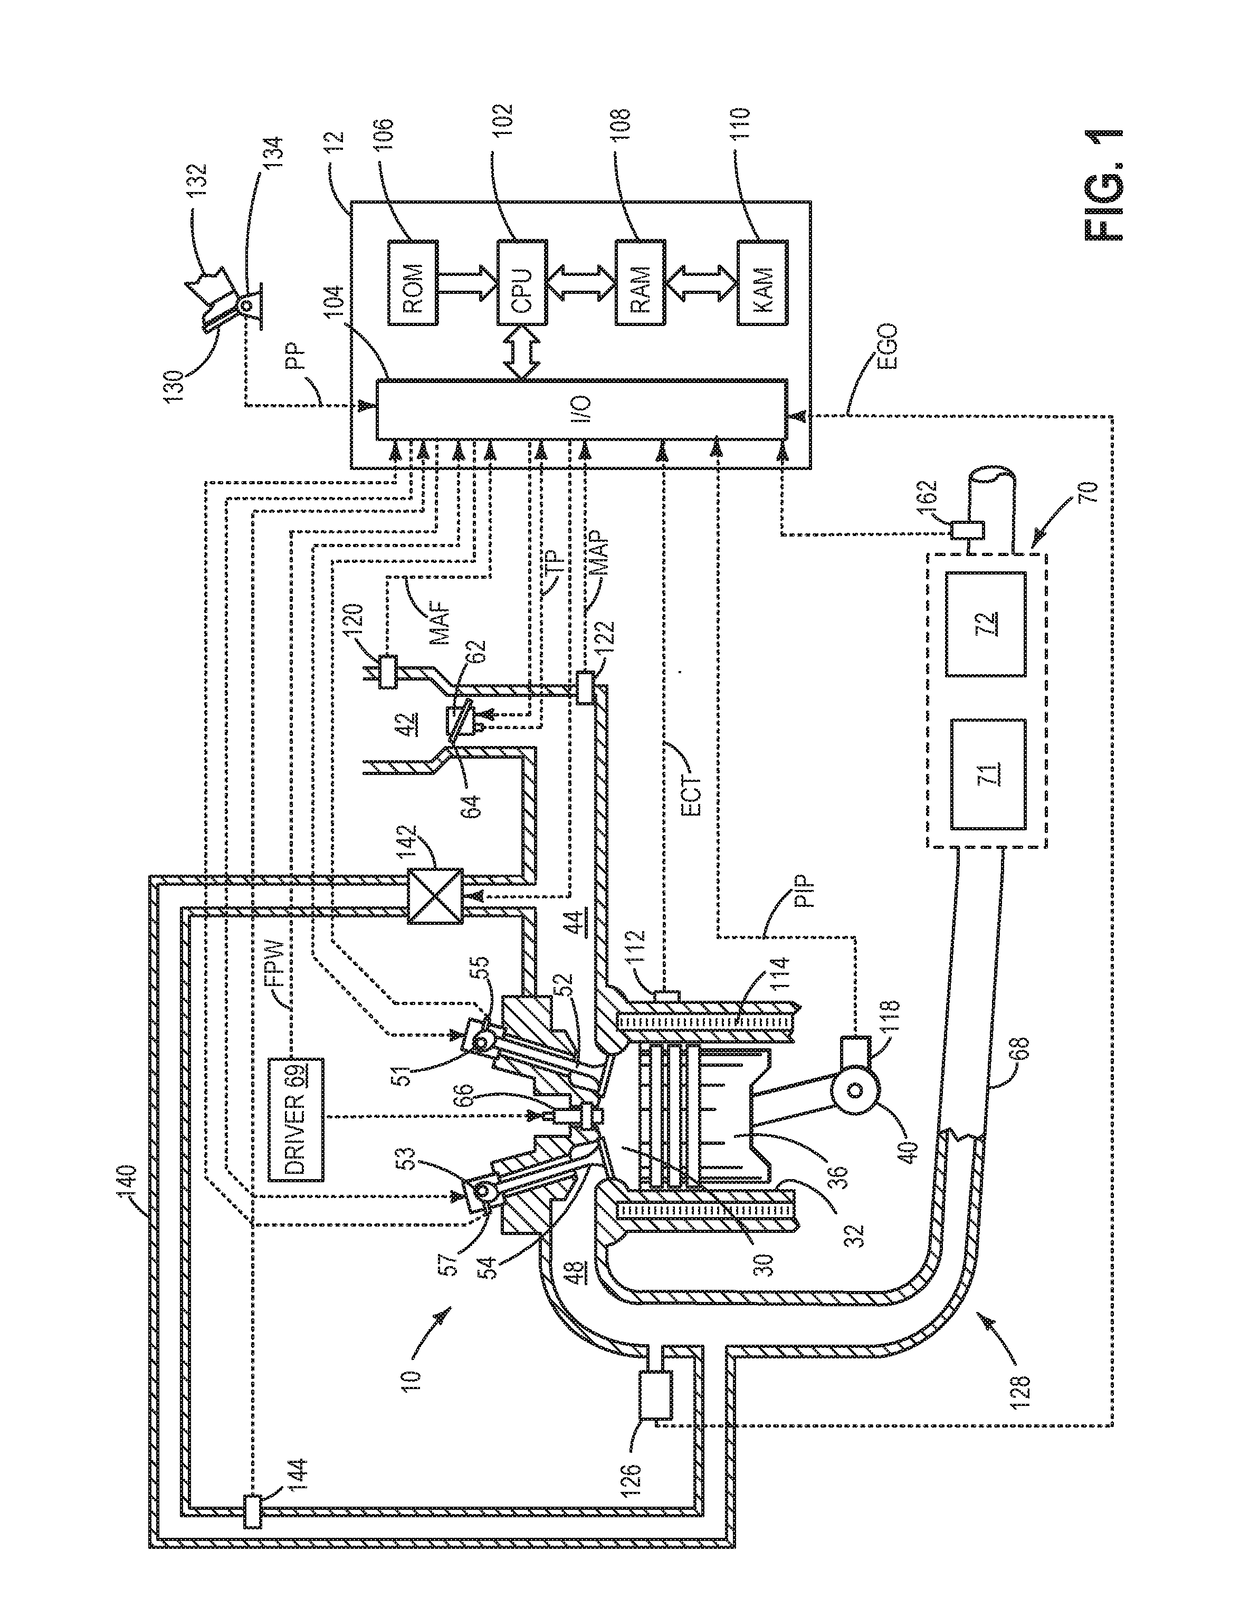 Method of fuel injection control